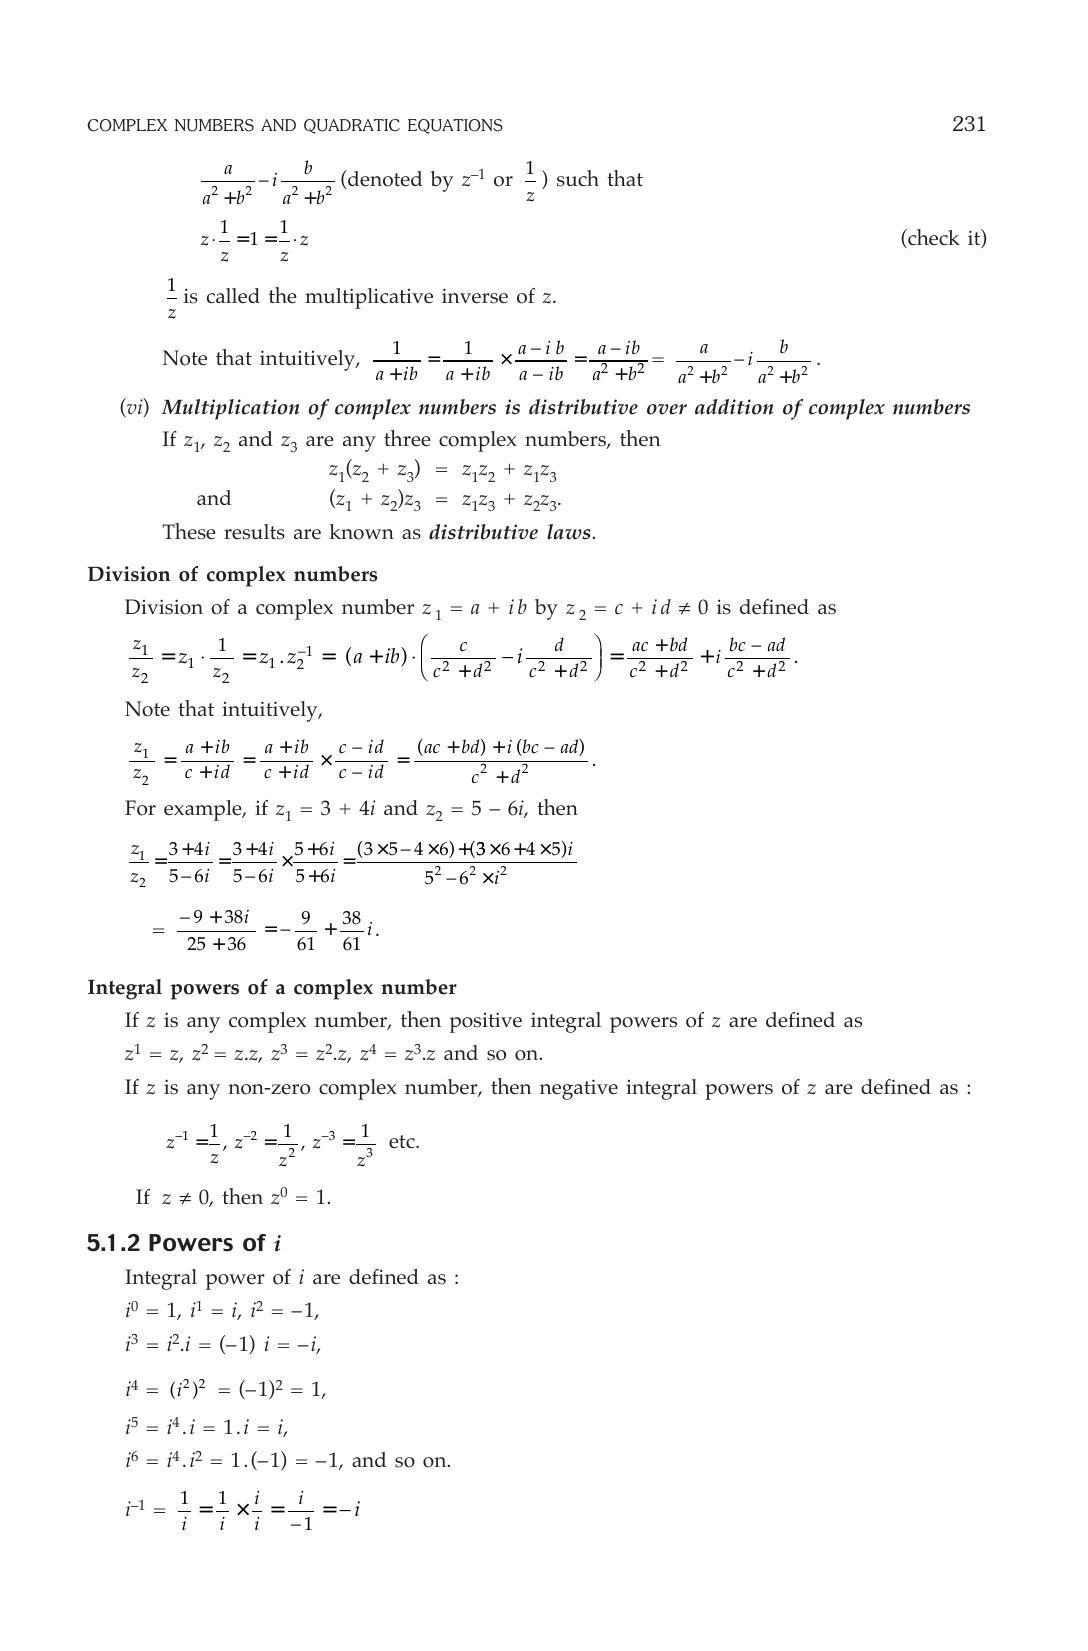 ML Aggarwal Class 11 Solutions: Complex Numbers and Quadratic Equations - Page 4